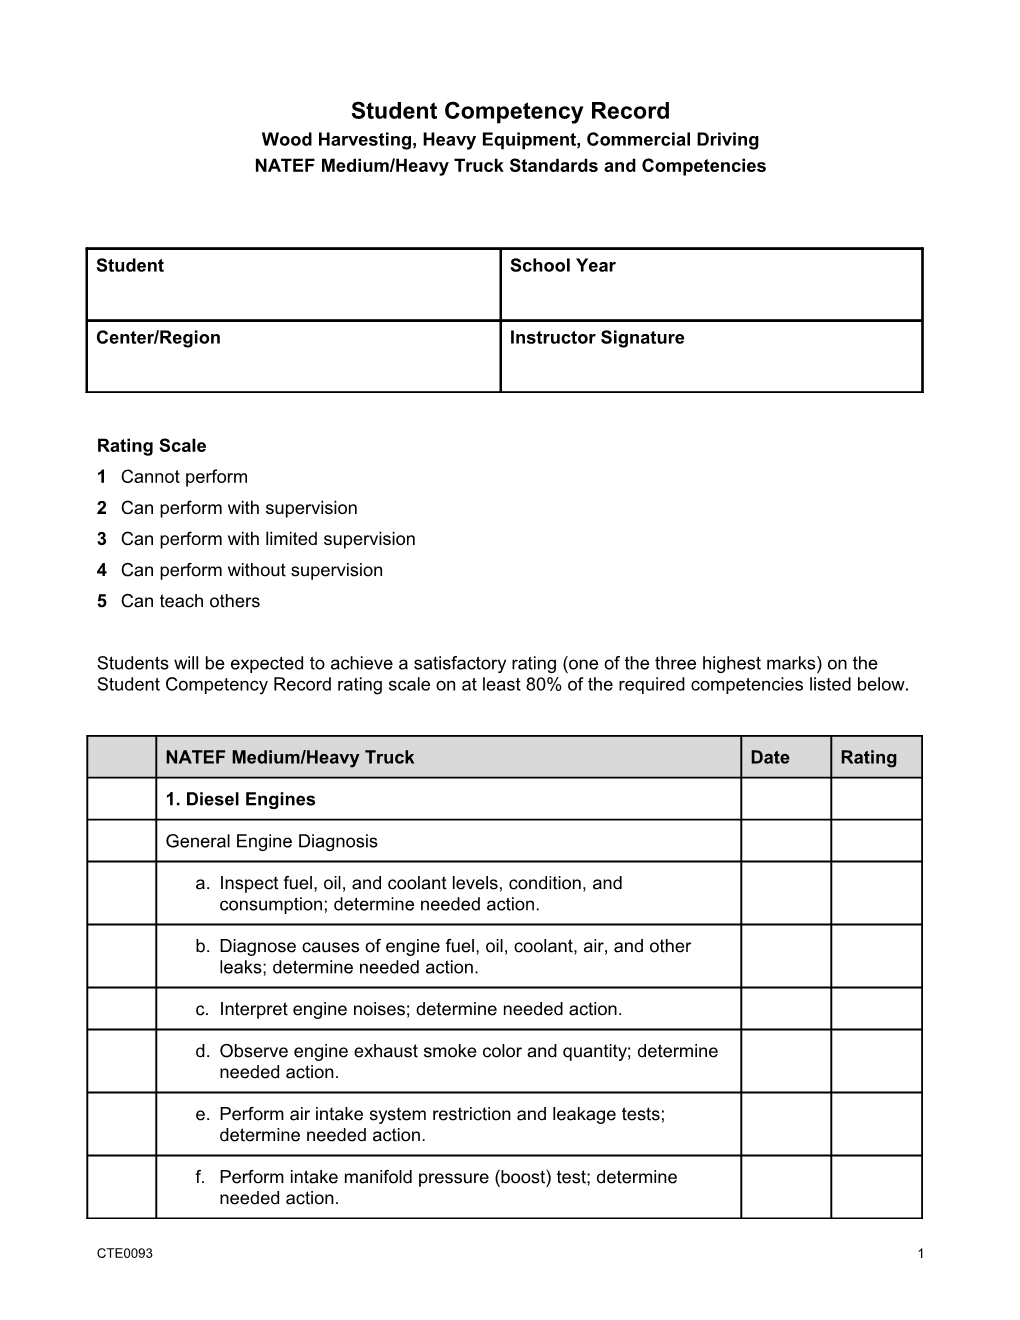 Student Competency Record s3